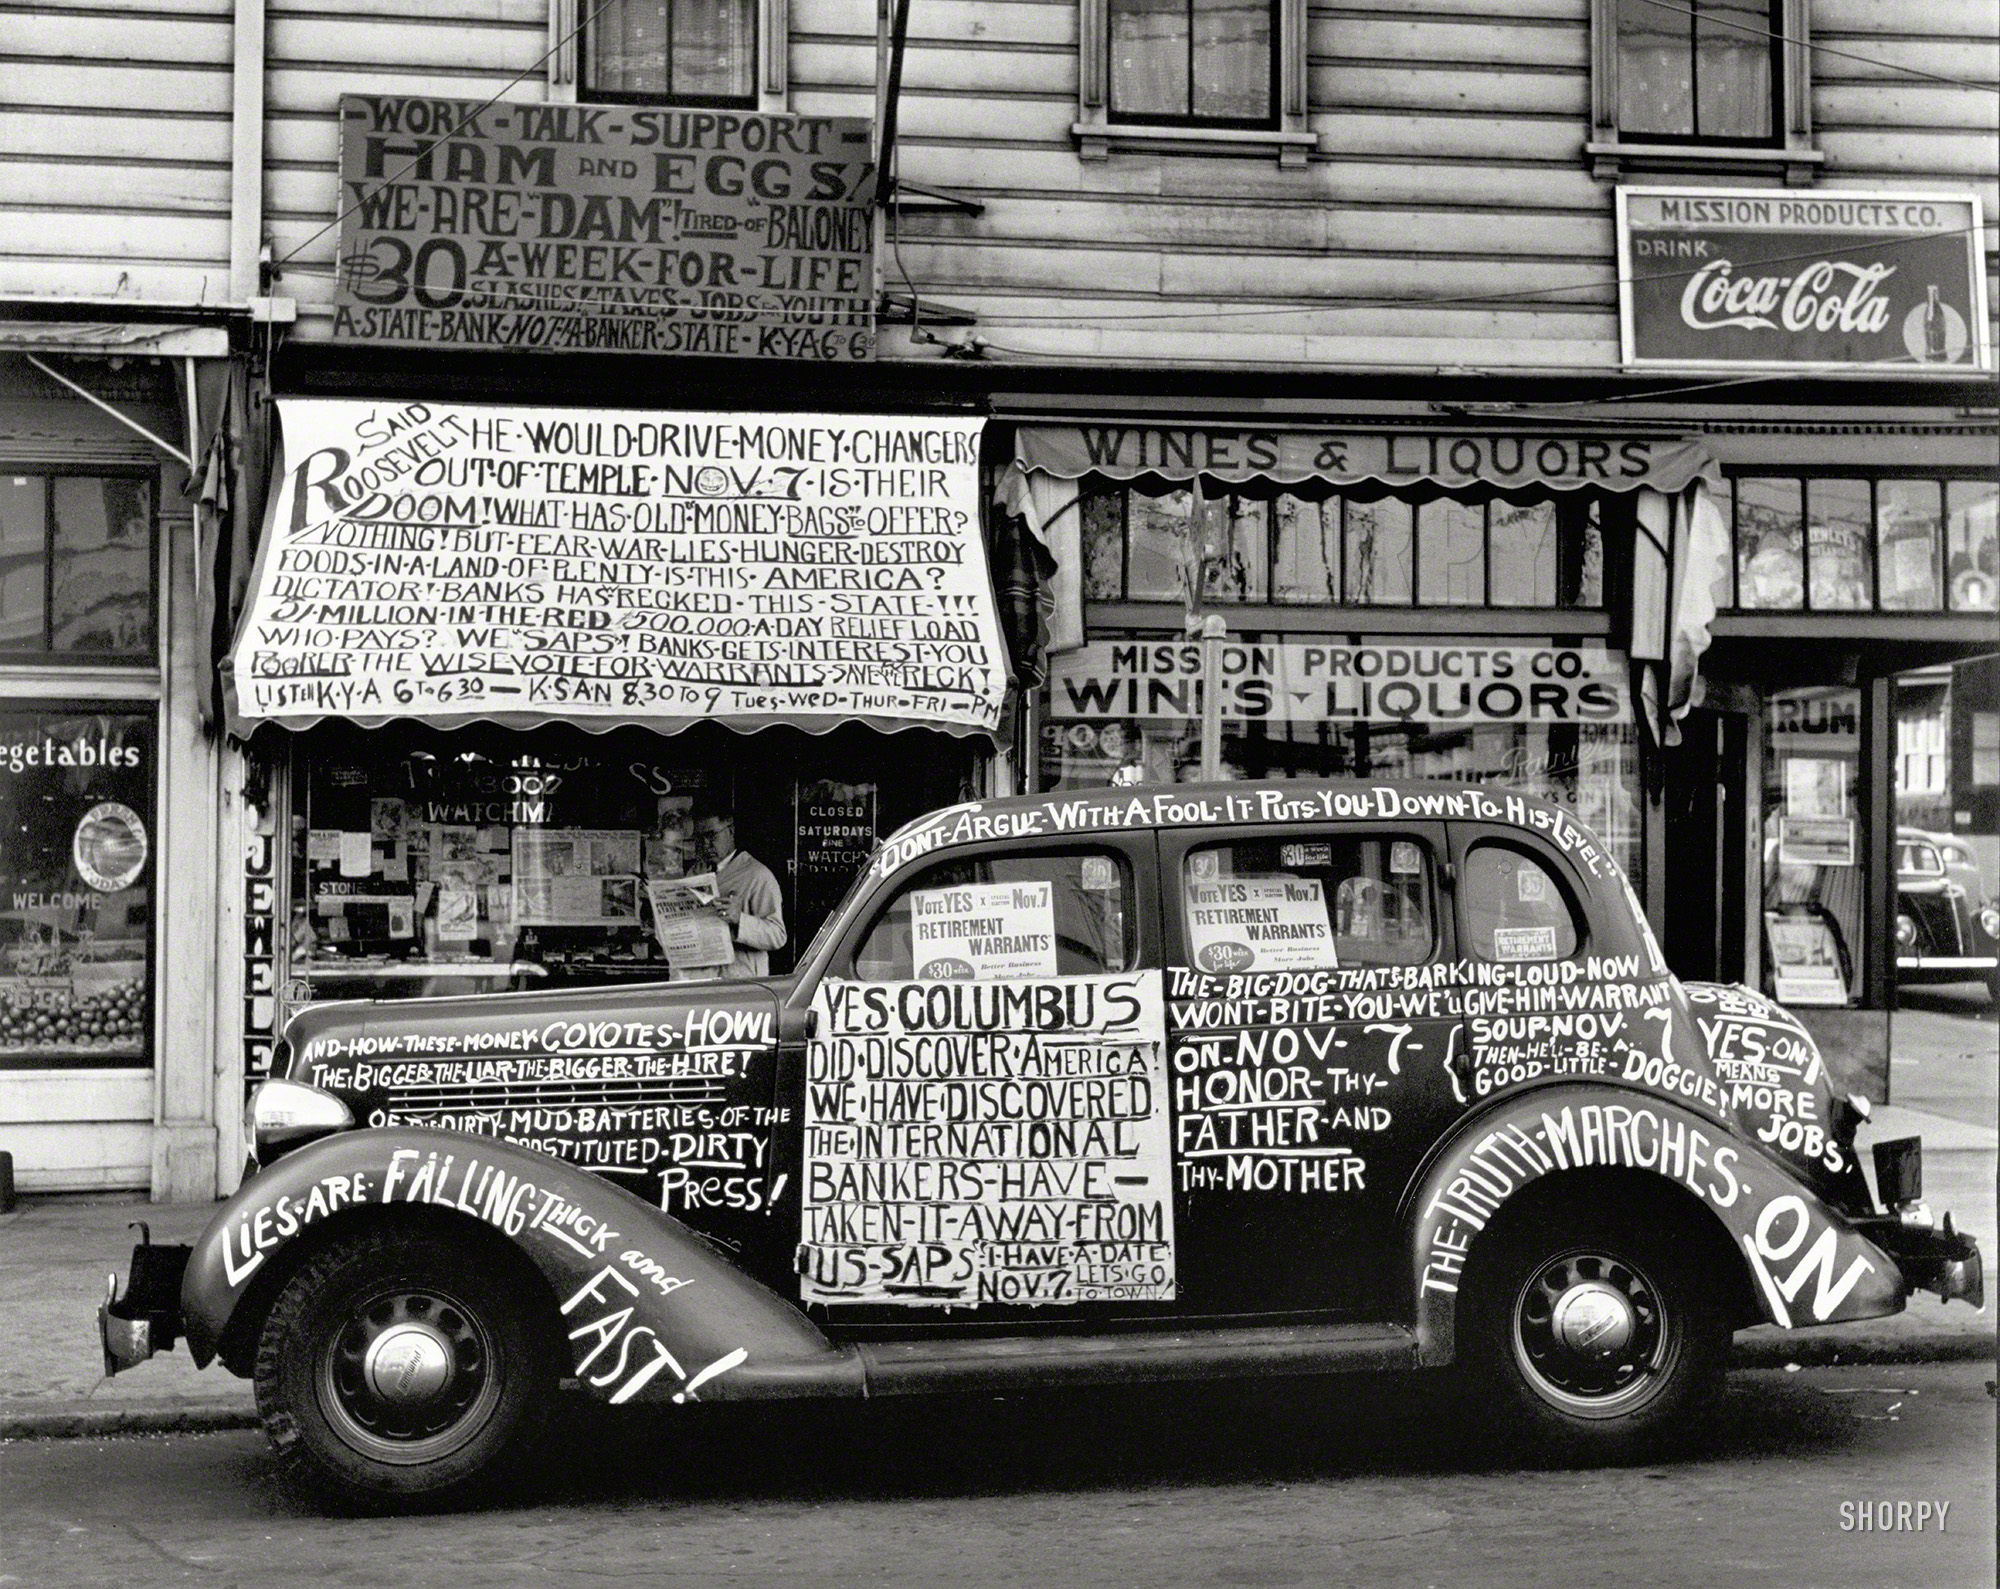 San Francisco, 1938. "Yes, Columbus Did Discover America!" A jeweler (and car) with definite political views. Gelatin silver print by the German-born painter and photographer John Gutmann (1905-1998). View full size.